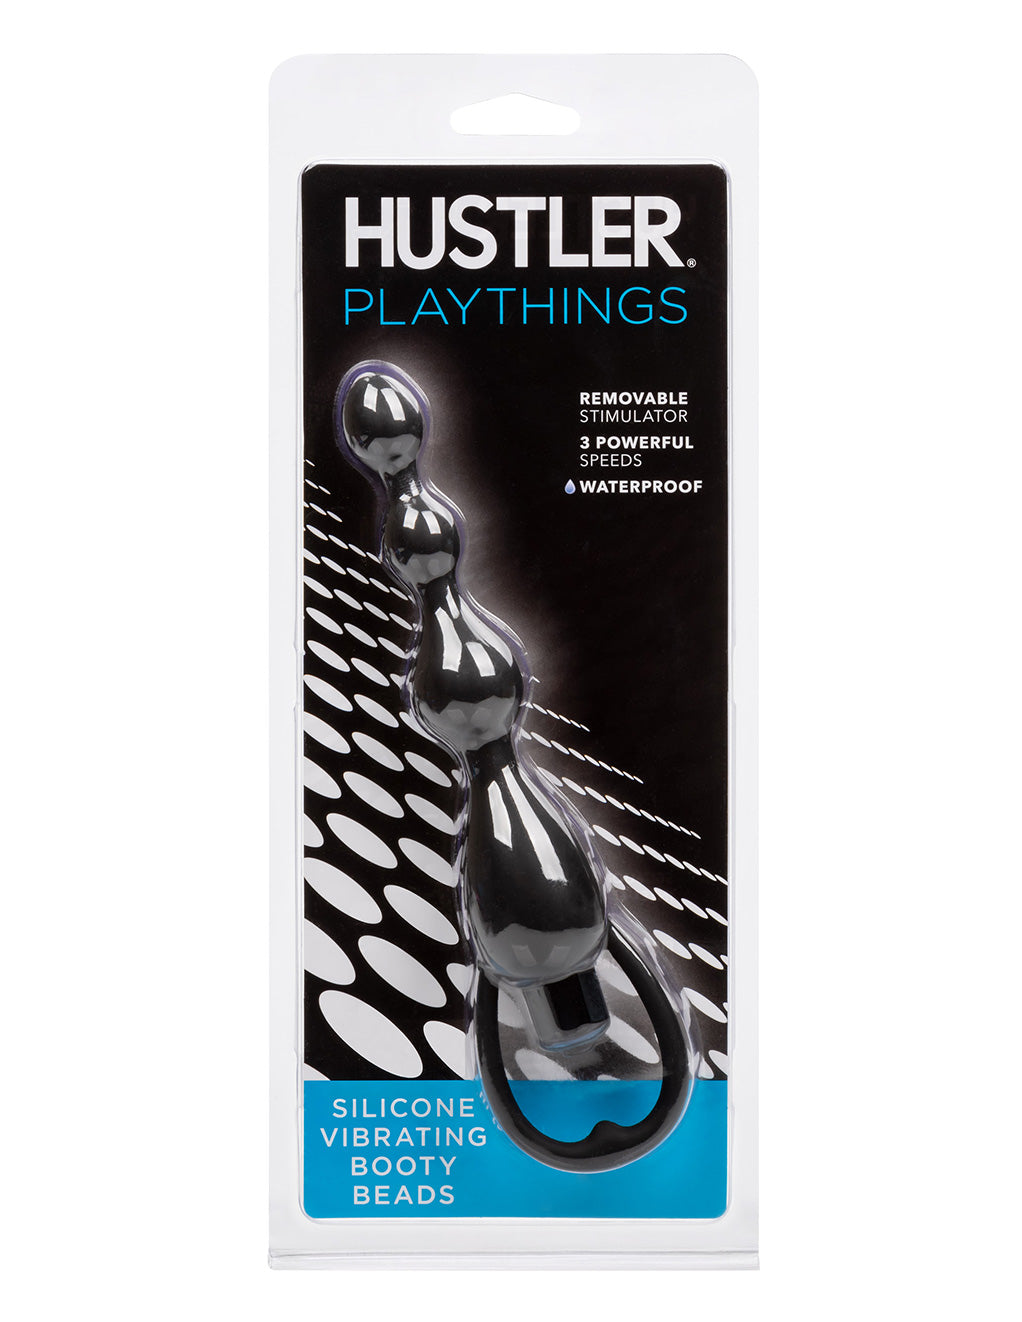 Hustler® Playthings Vibrating Silicone Booty Beads- Front package